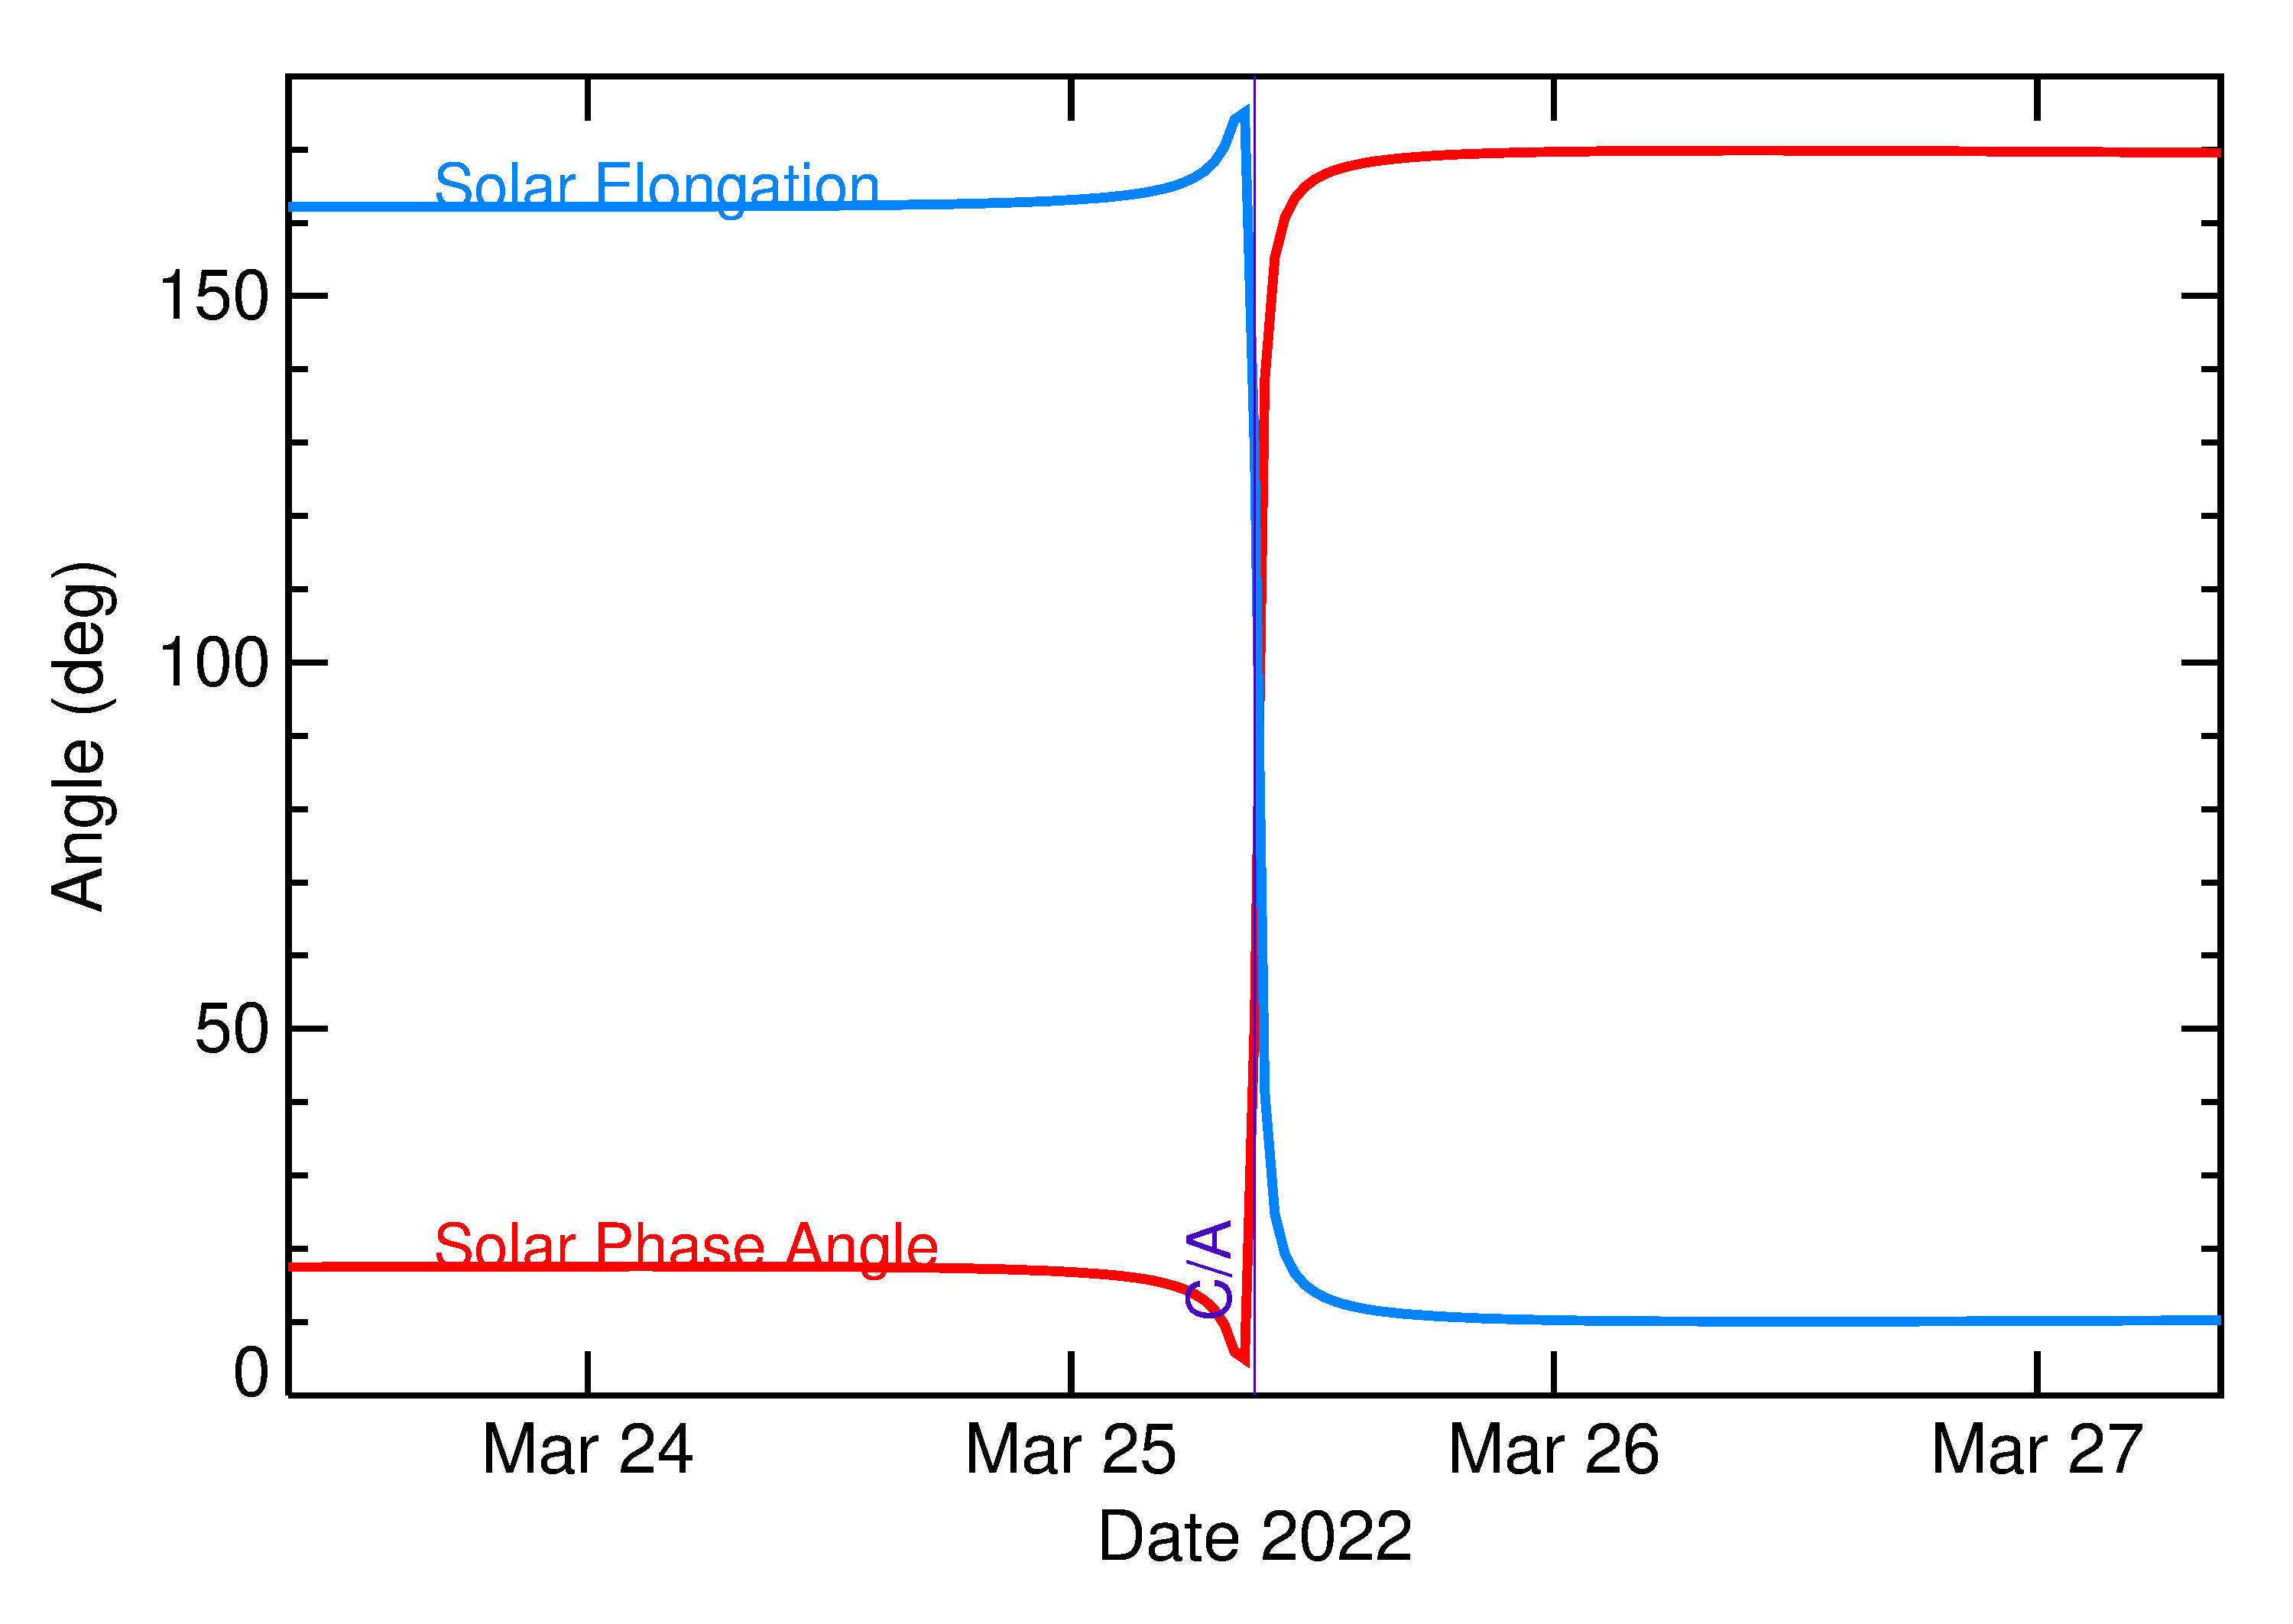 Solar Elongation and Solar Phase Angle of 2022 FD1 in the days around closest approach